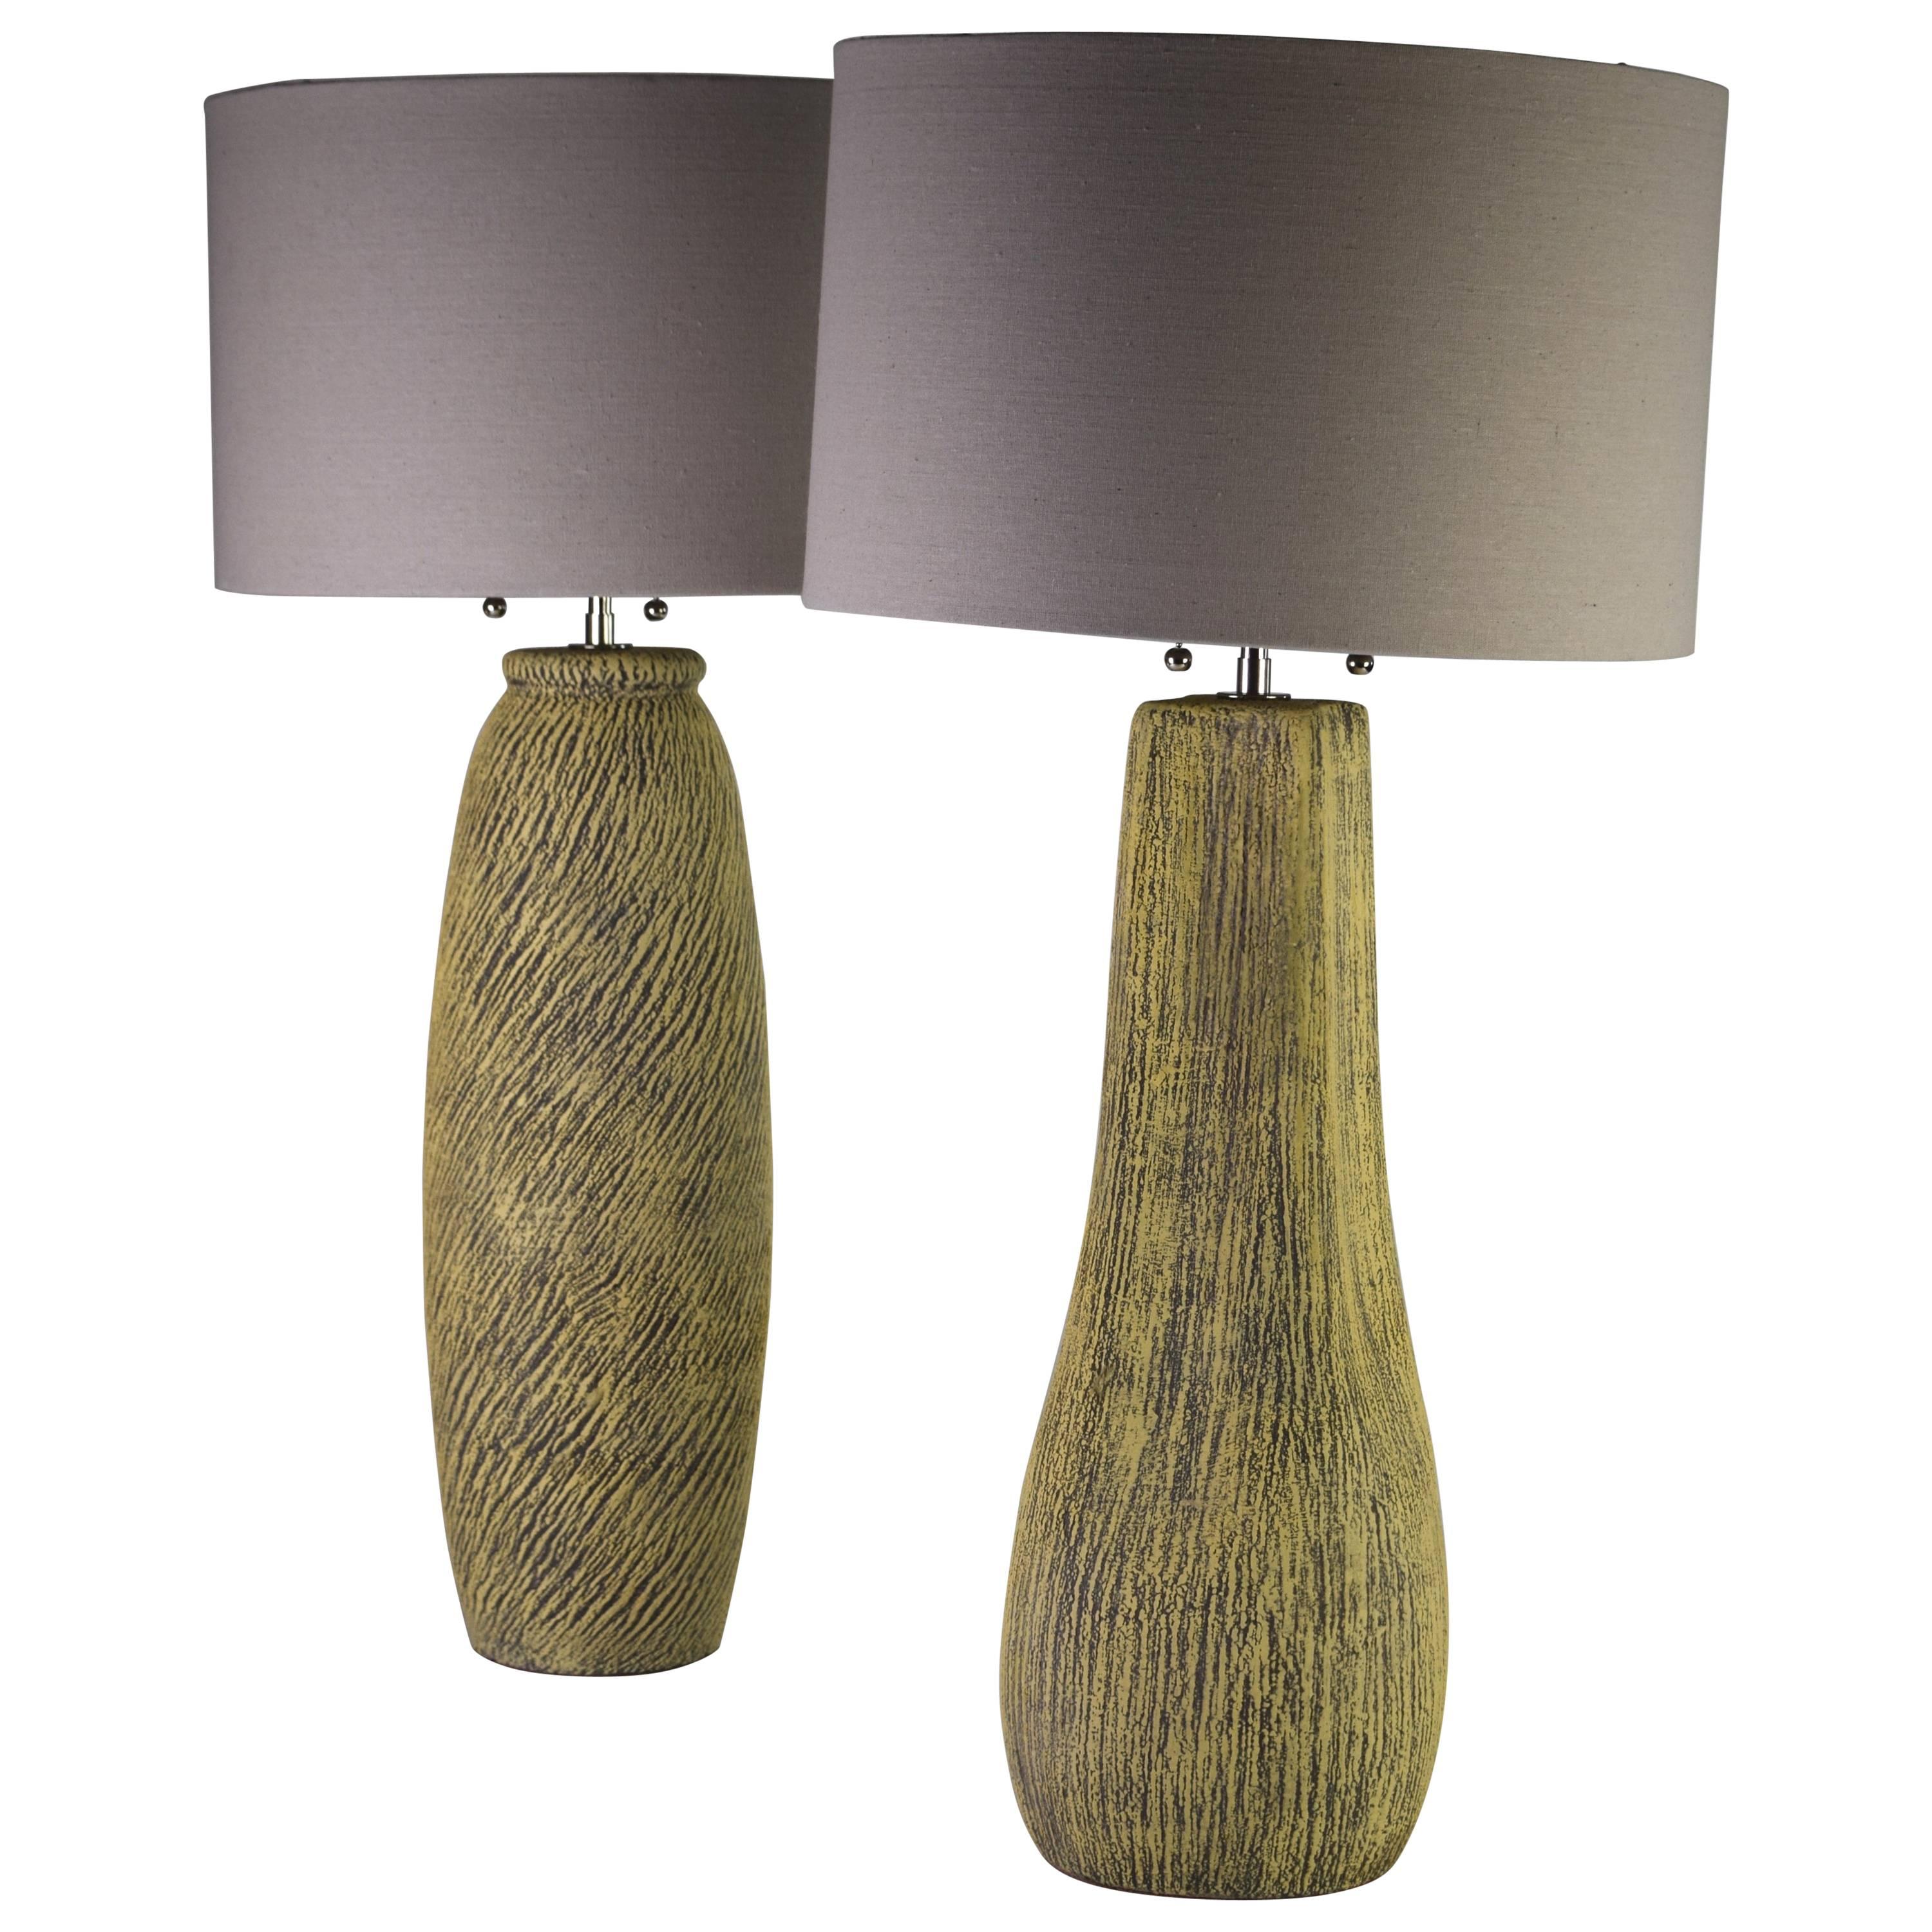 Mid-Century Modern Ceramic Pair of Lamps by Kelby